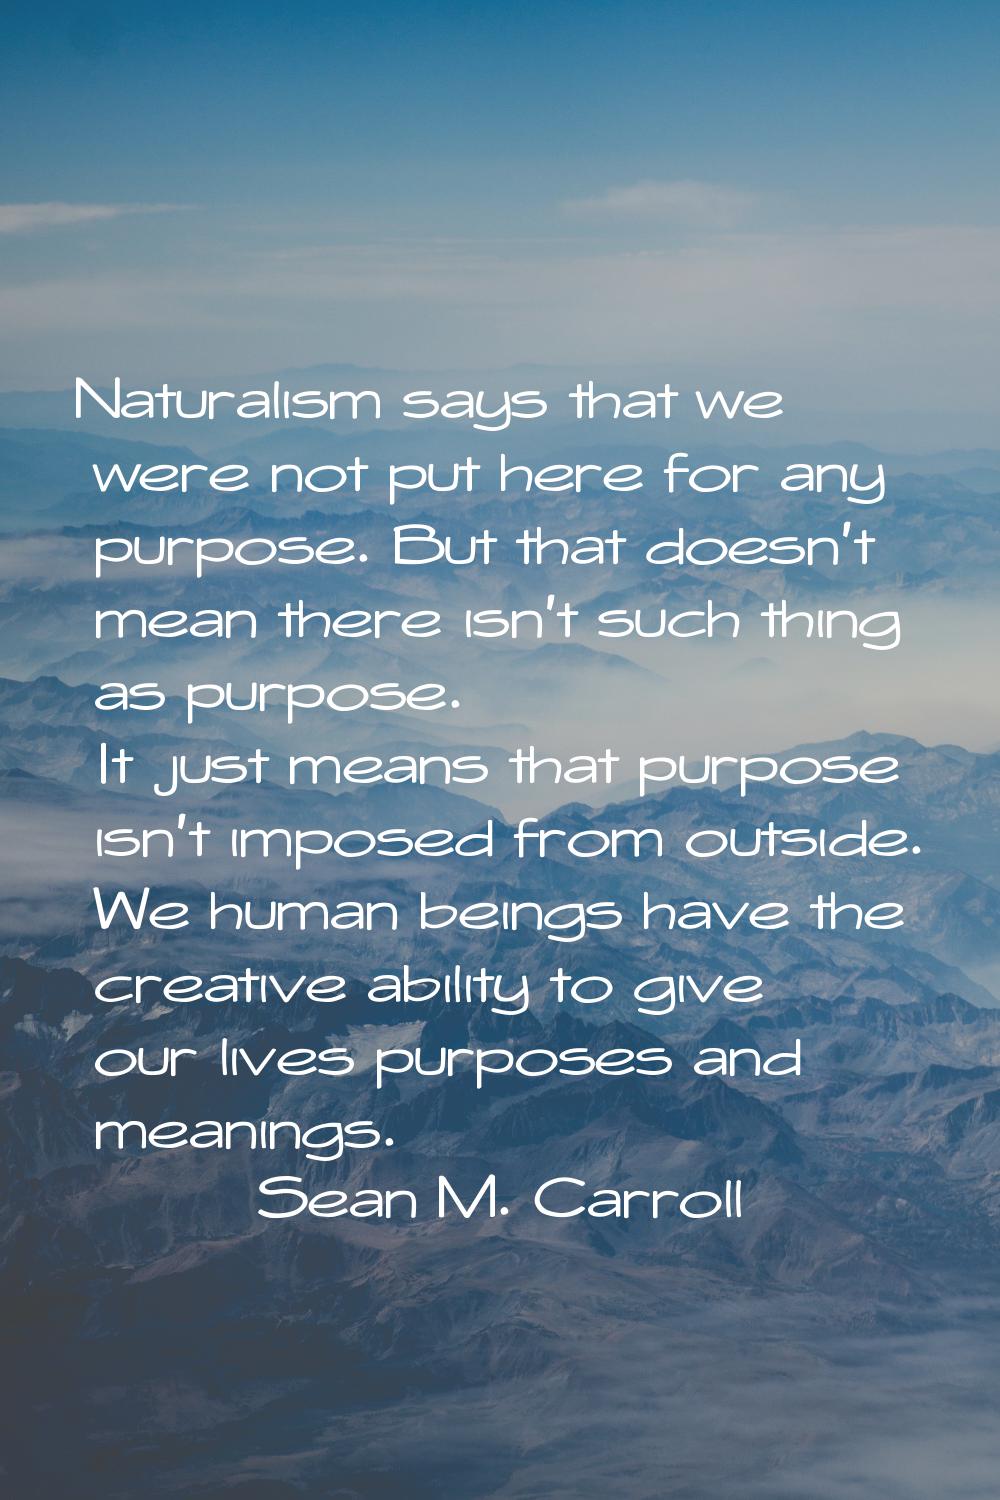 Naturalism says that we were not put here for any purpose. But that doesn't mean there isn't such t